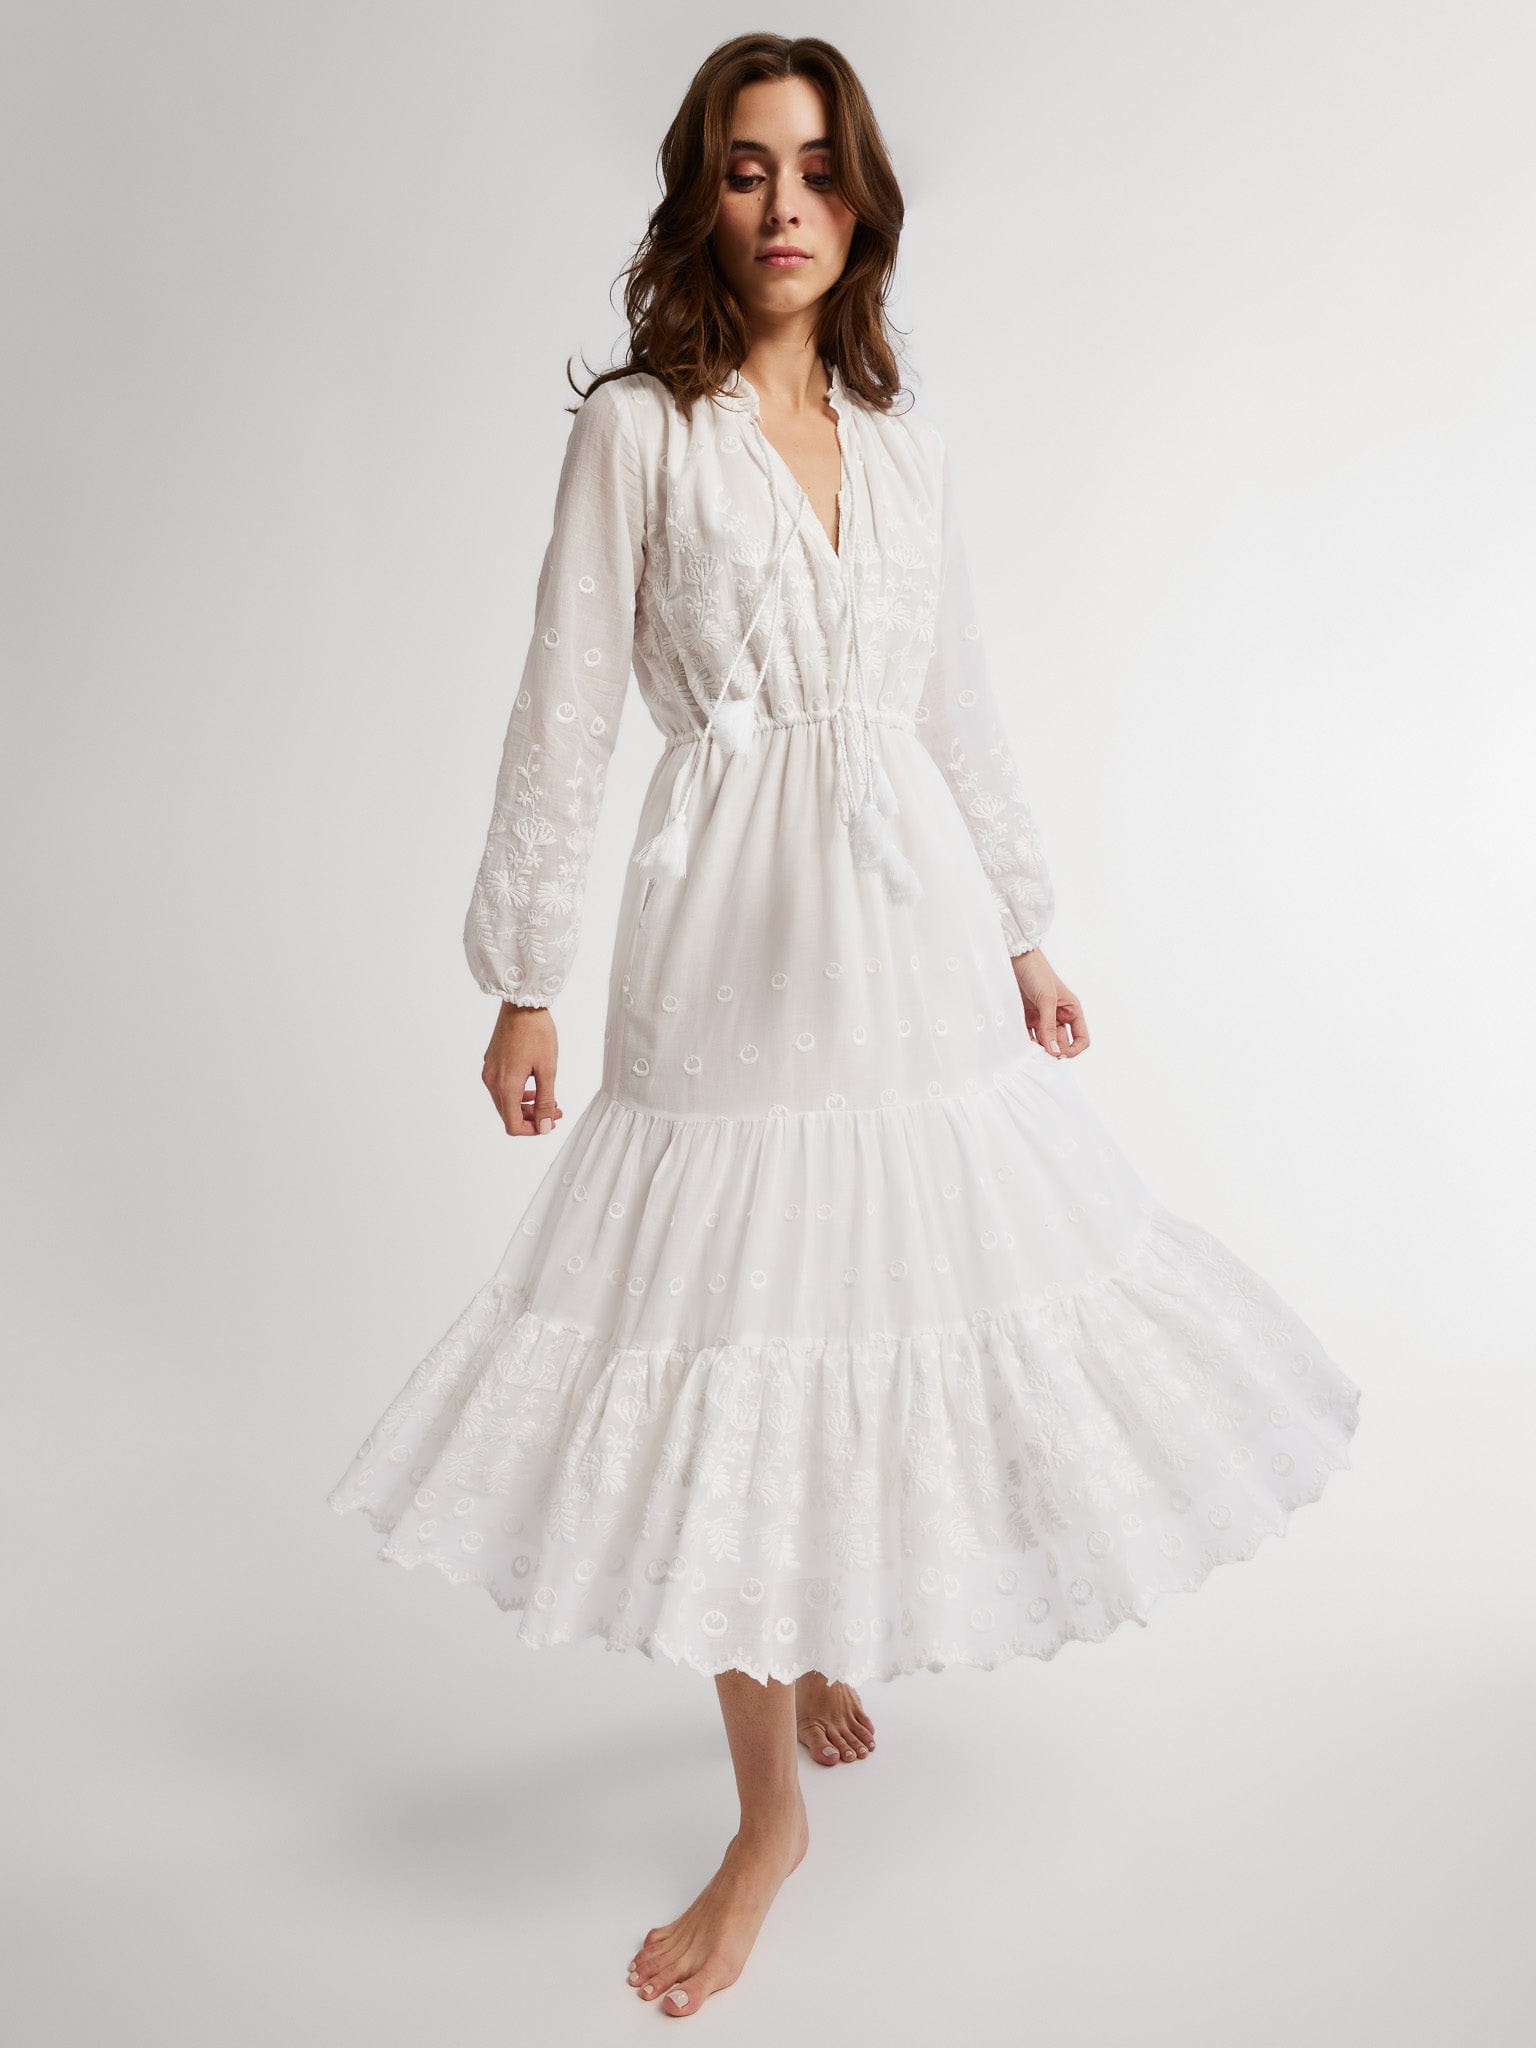 MILLE Clothing Astrid Dress in White Petal Embroidery